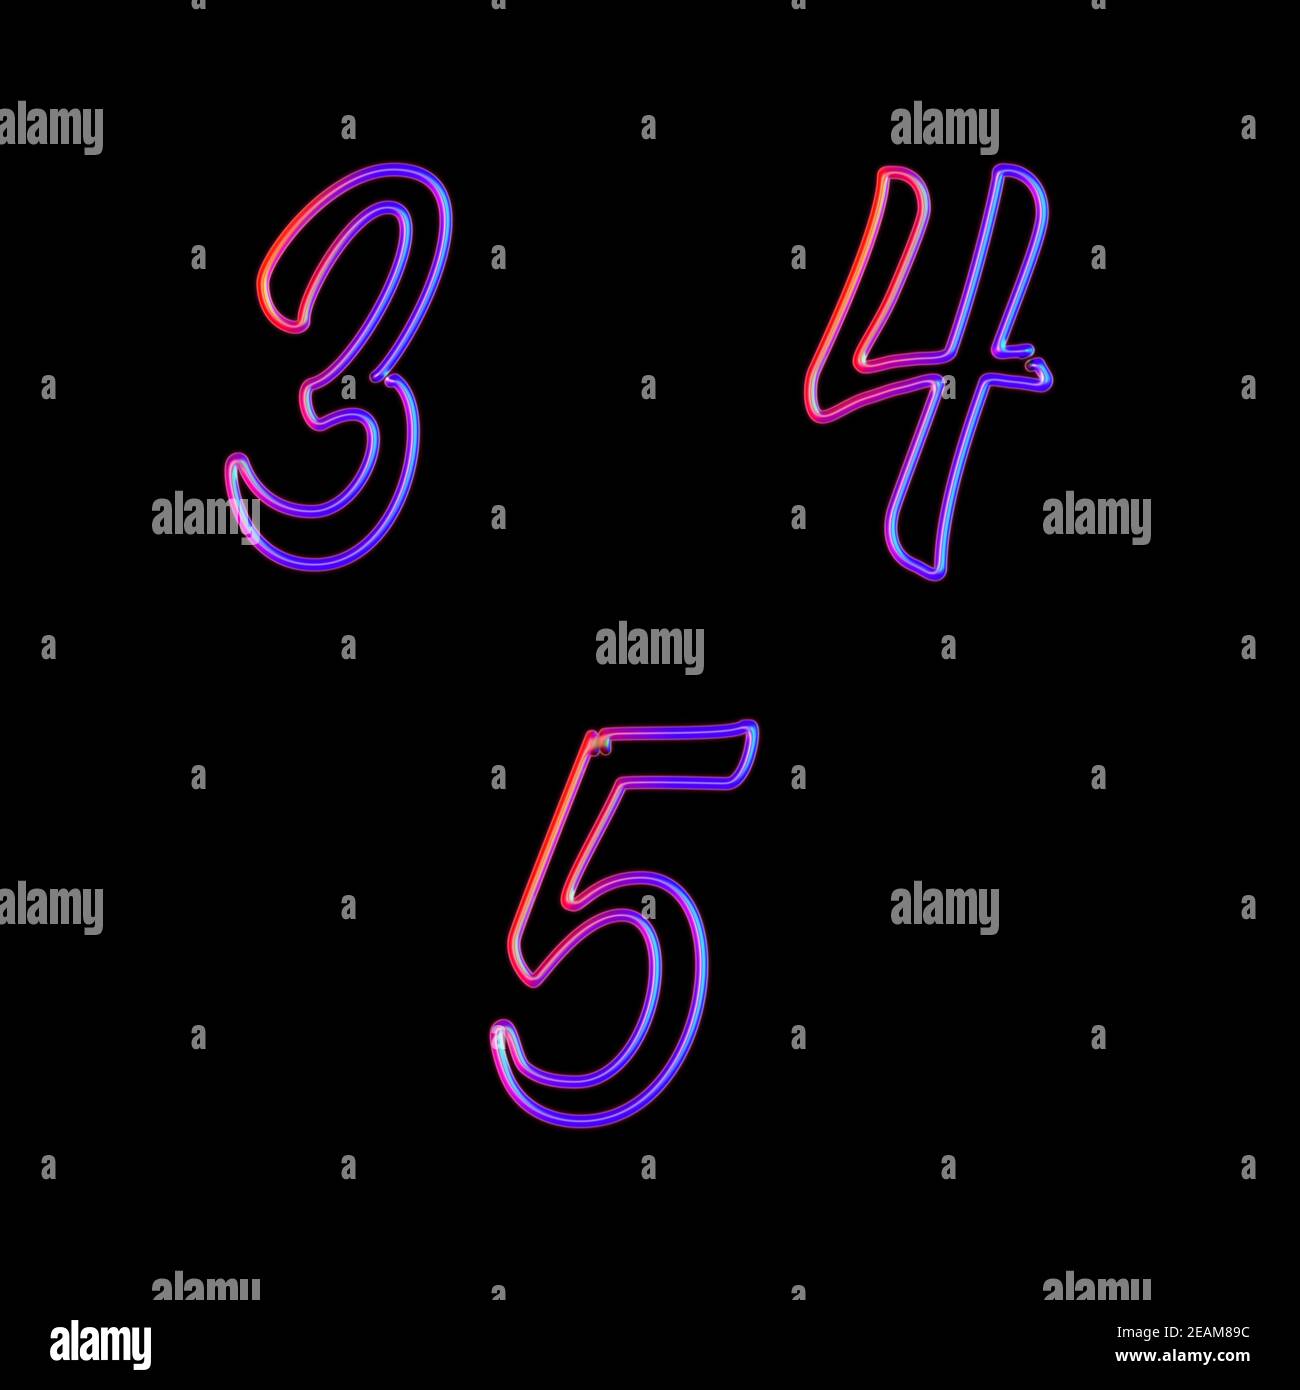 3D rendering of glowing neon digits - digits 3-5 Stock Photo